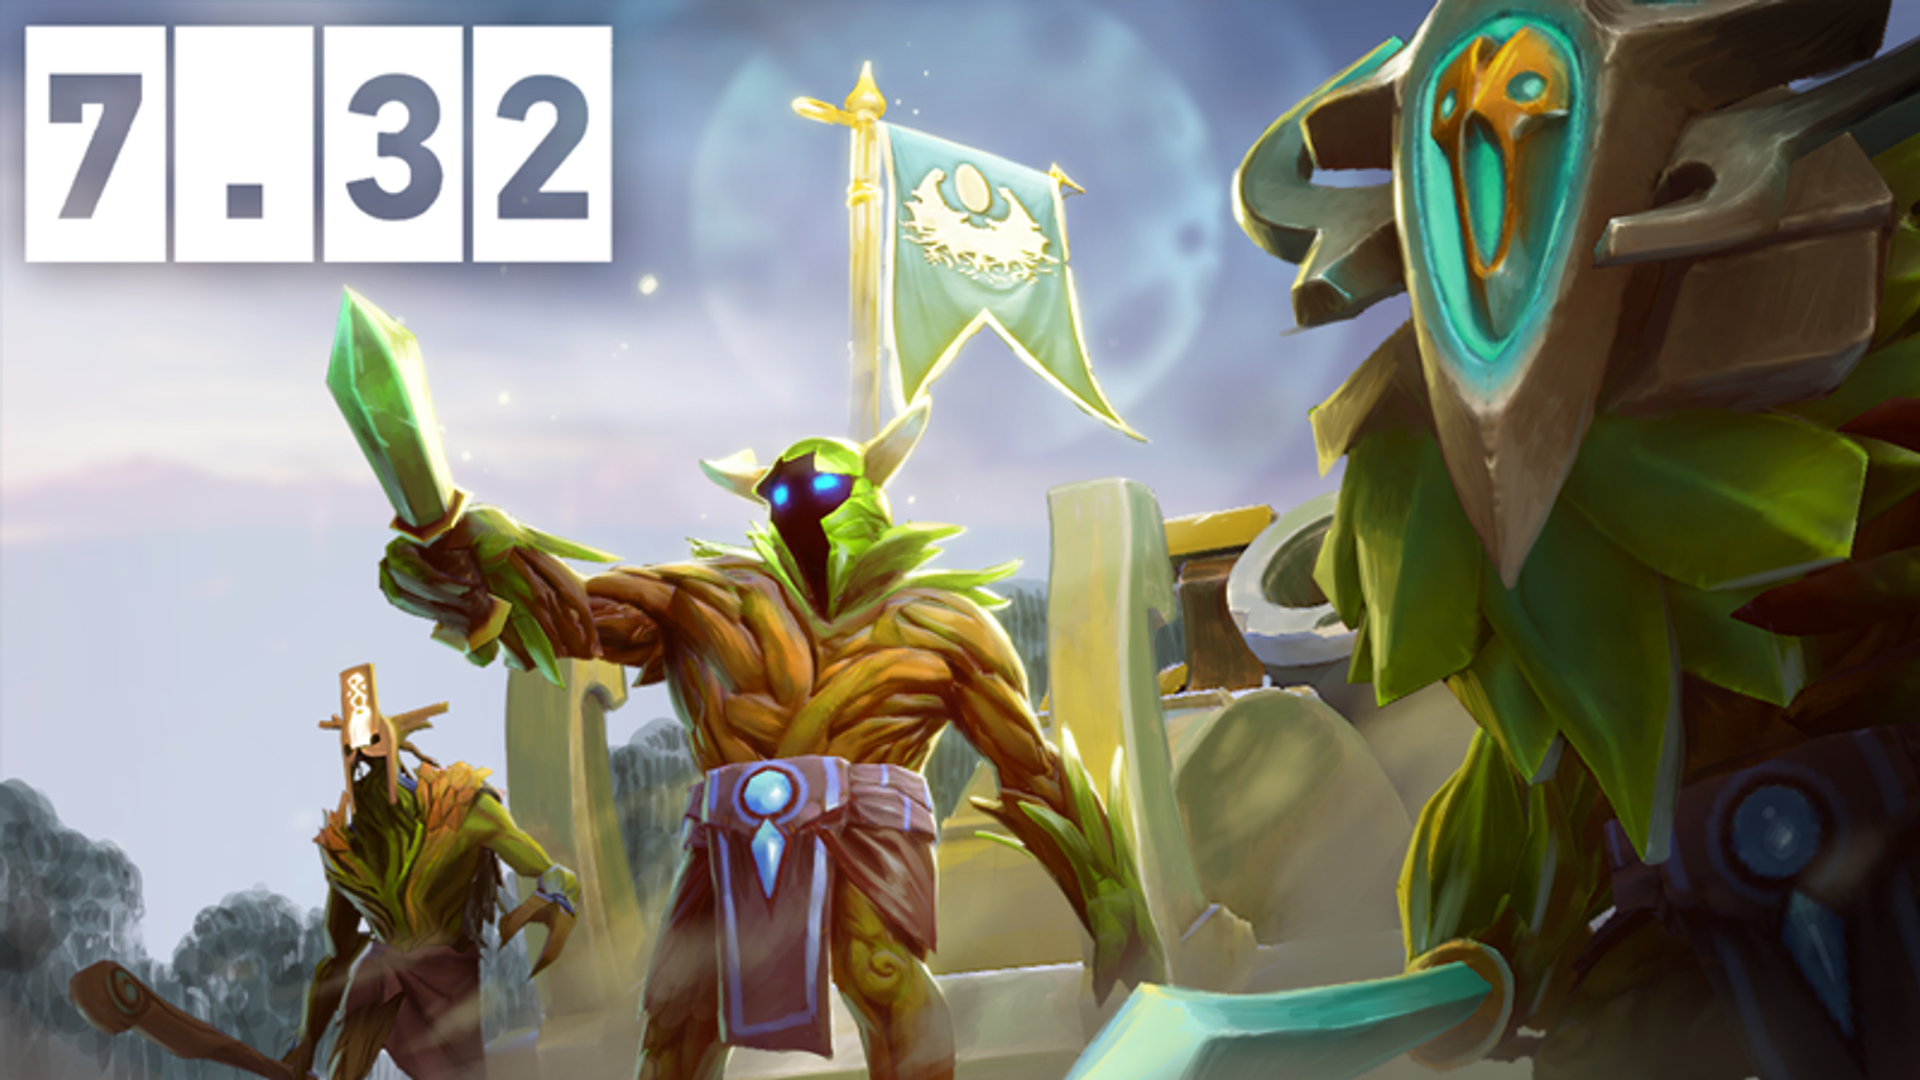 Dota 2 News : Top 5 mid heroes in pubs from the first month of Dota 2 patch  7.34